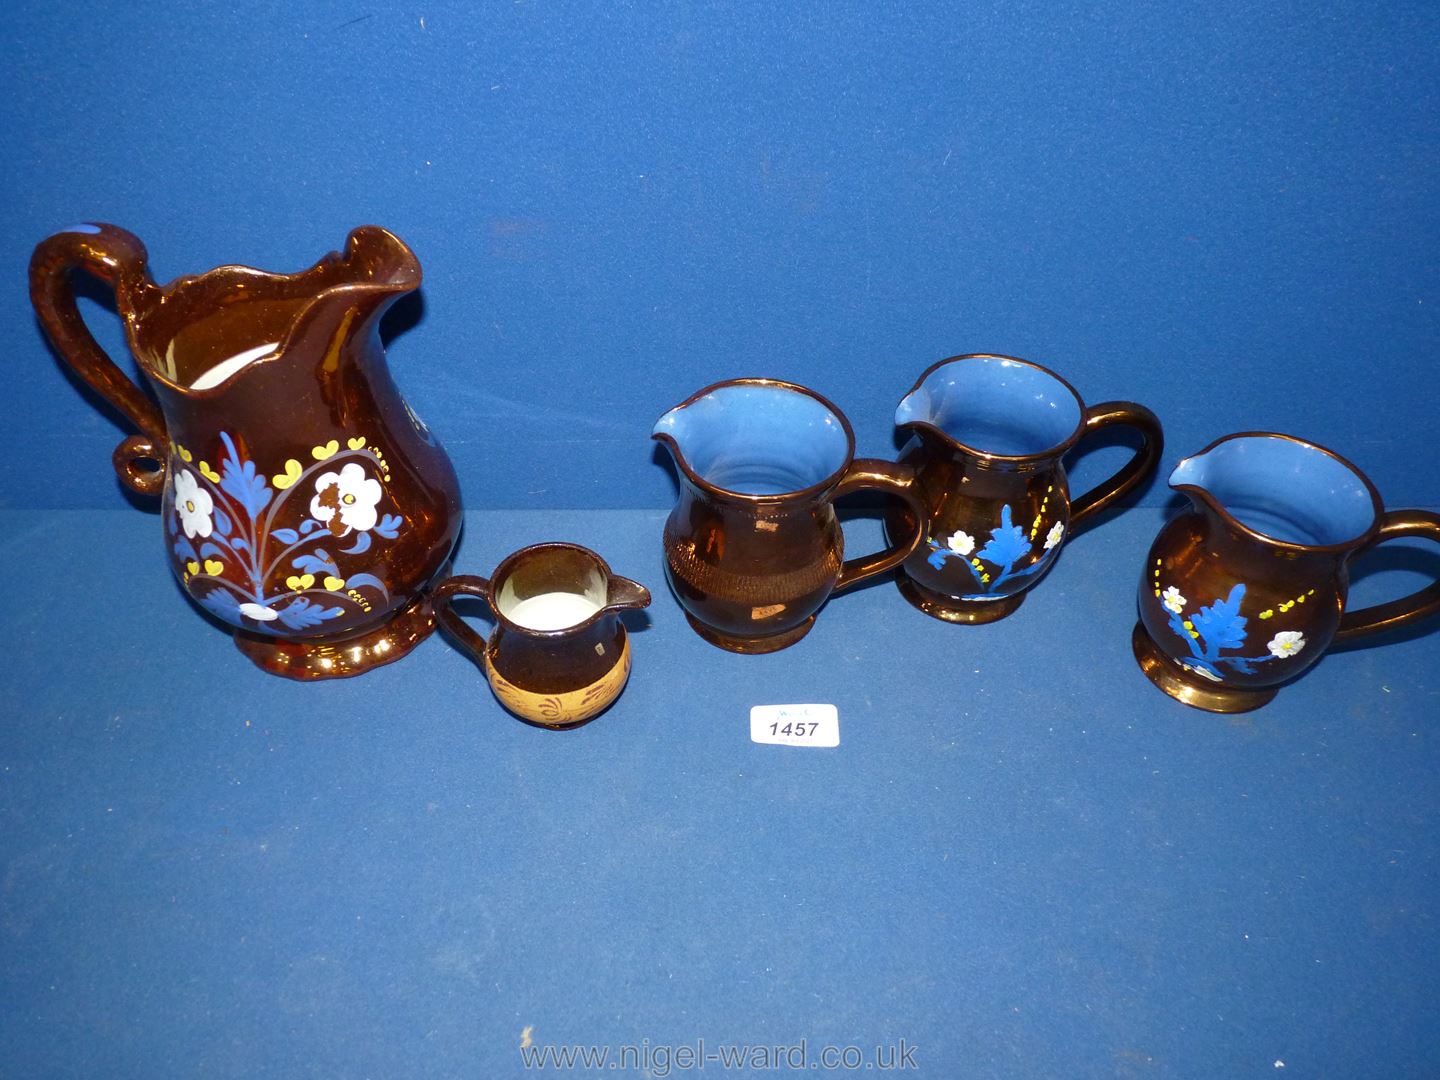 Five lustre jugs in various sizes and patterns including three hand painted with blue/white and